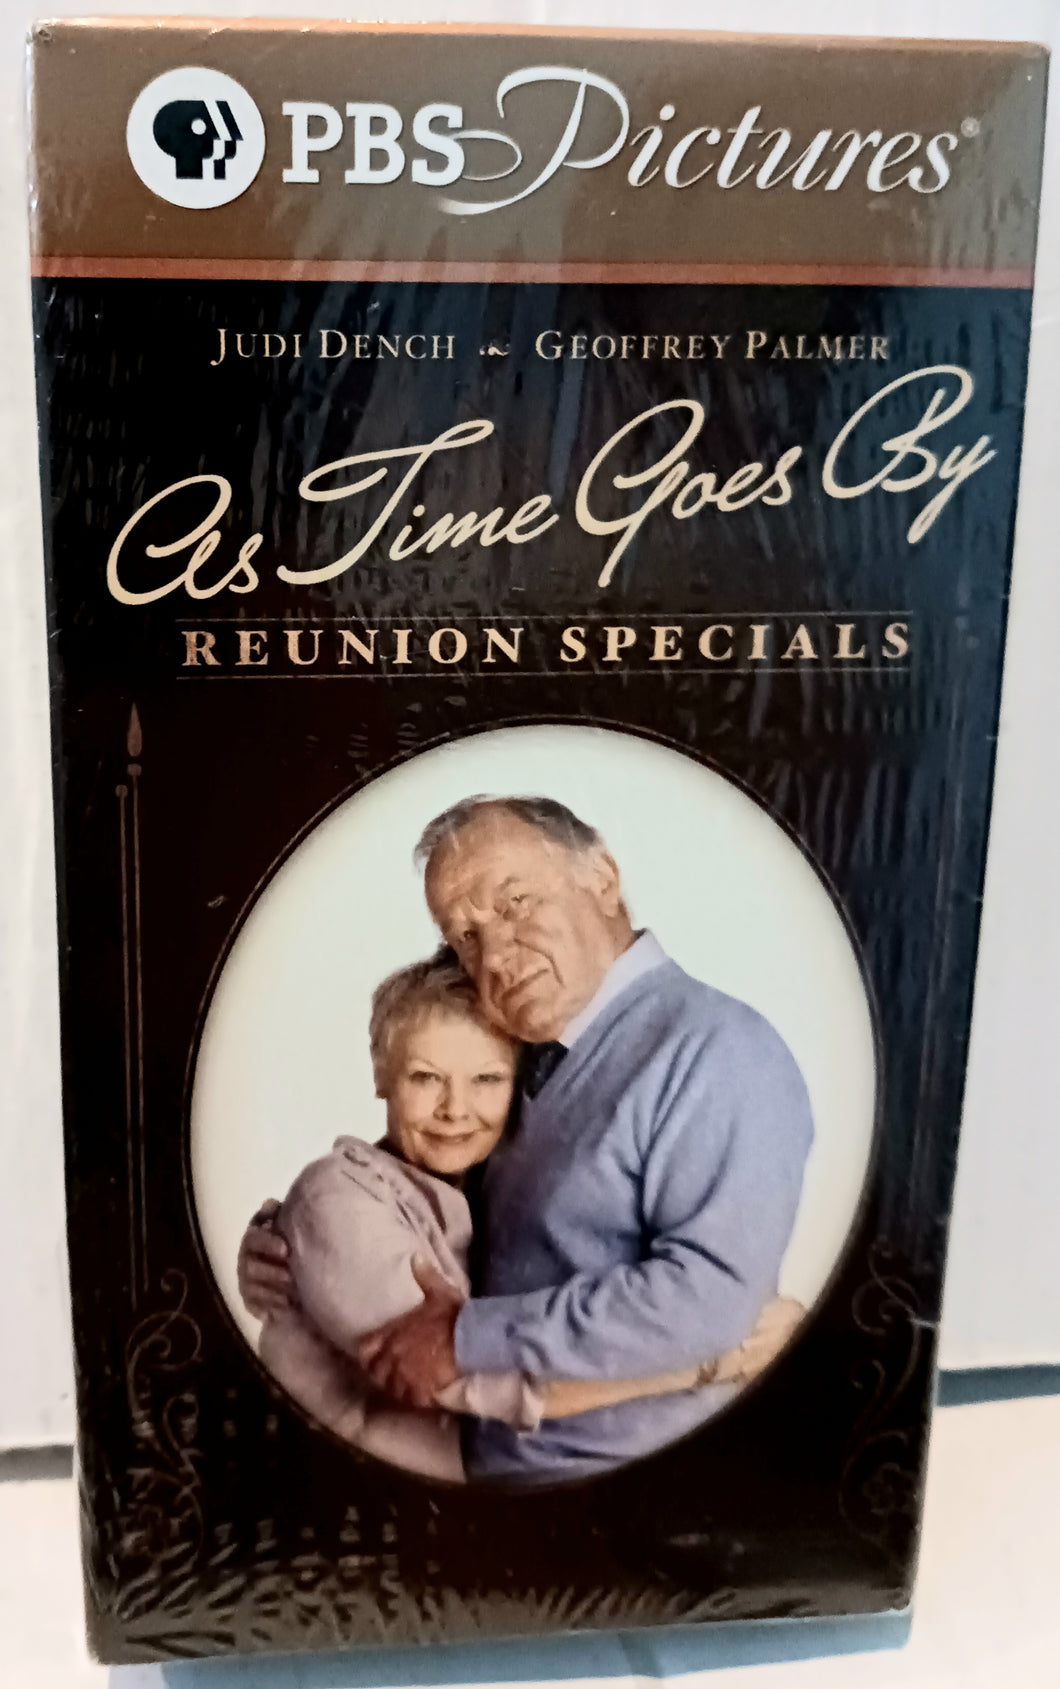 As Time Goes By Reunion Specials VHS Tape NWOT New PBS Pictures ATIM901 2005 Special Features Judi Dench